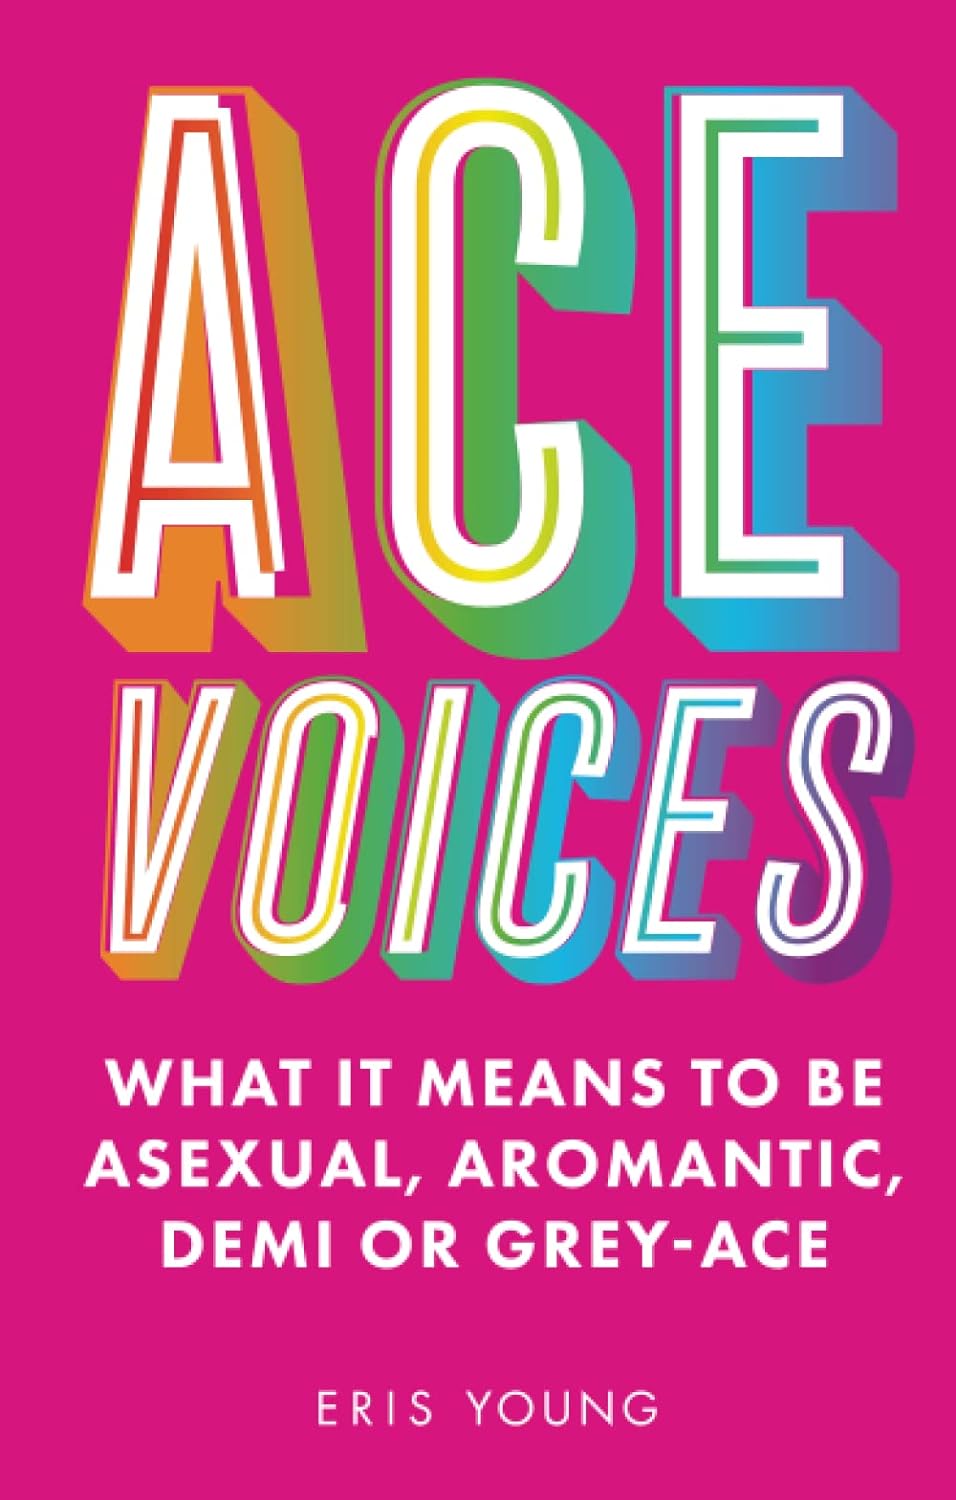 Ace Voices: What it Means to be Asexual, Aromantic, Demi or Grey-Ace